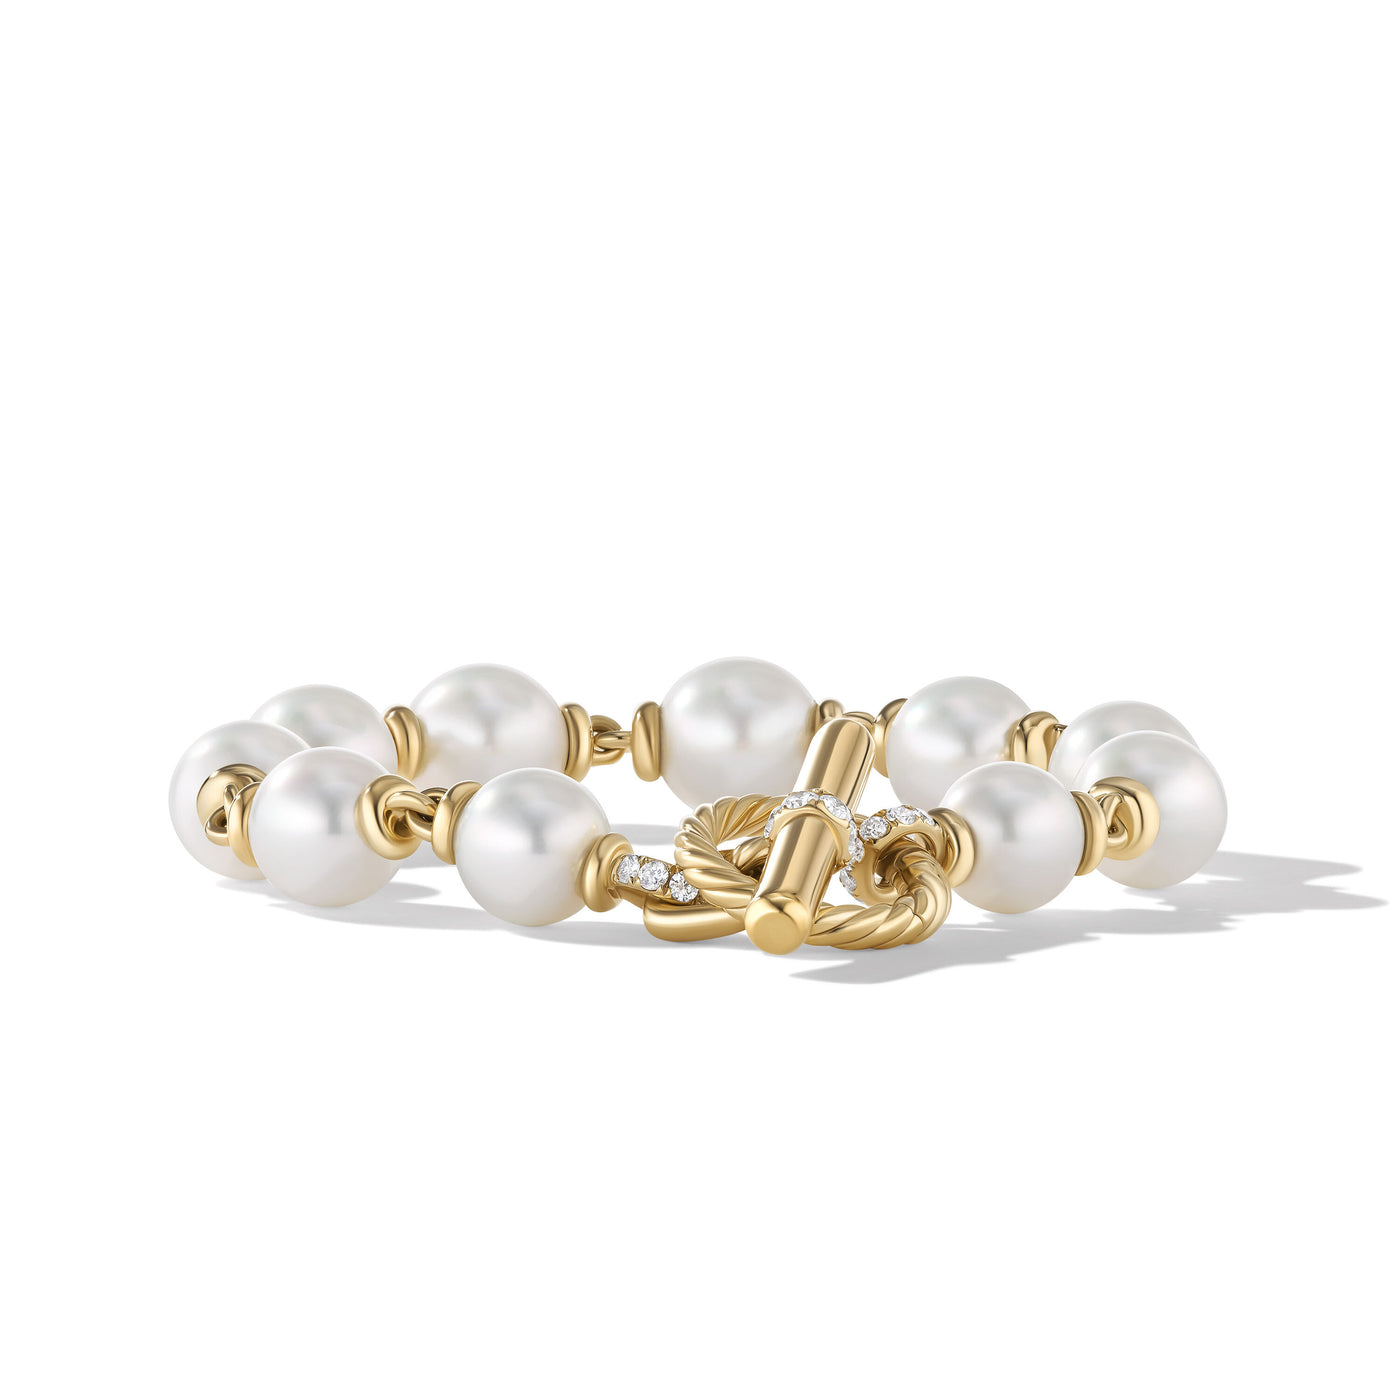 Pearl Linked Bracelet in 18K Yellow Gold with Diamonds